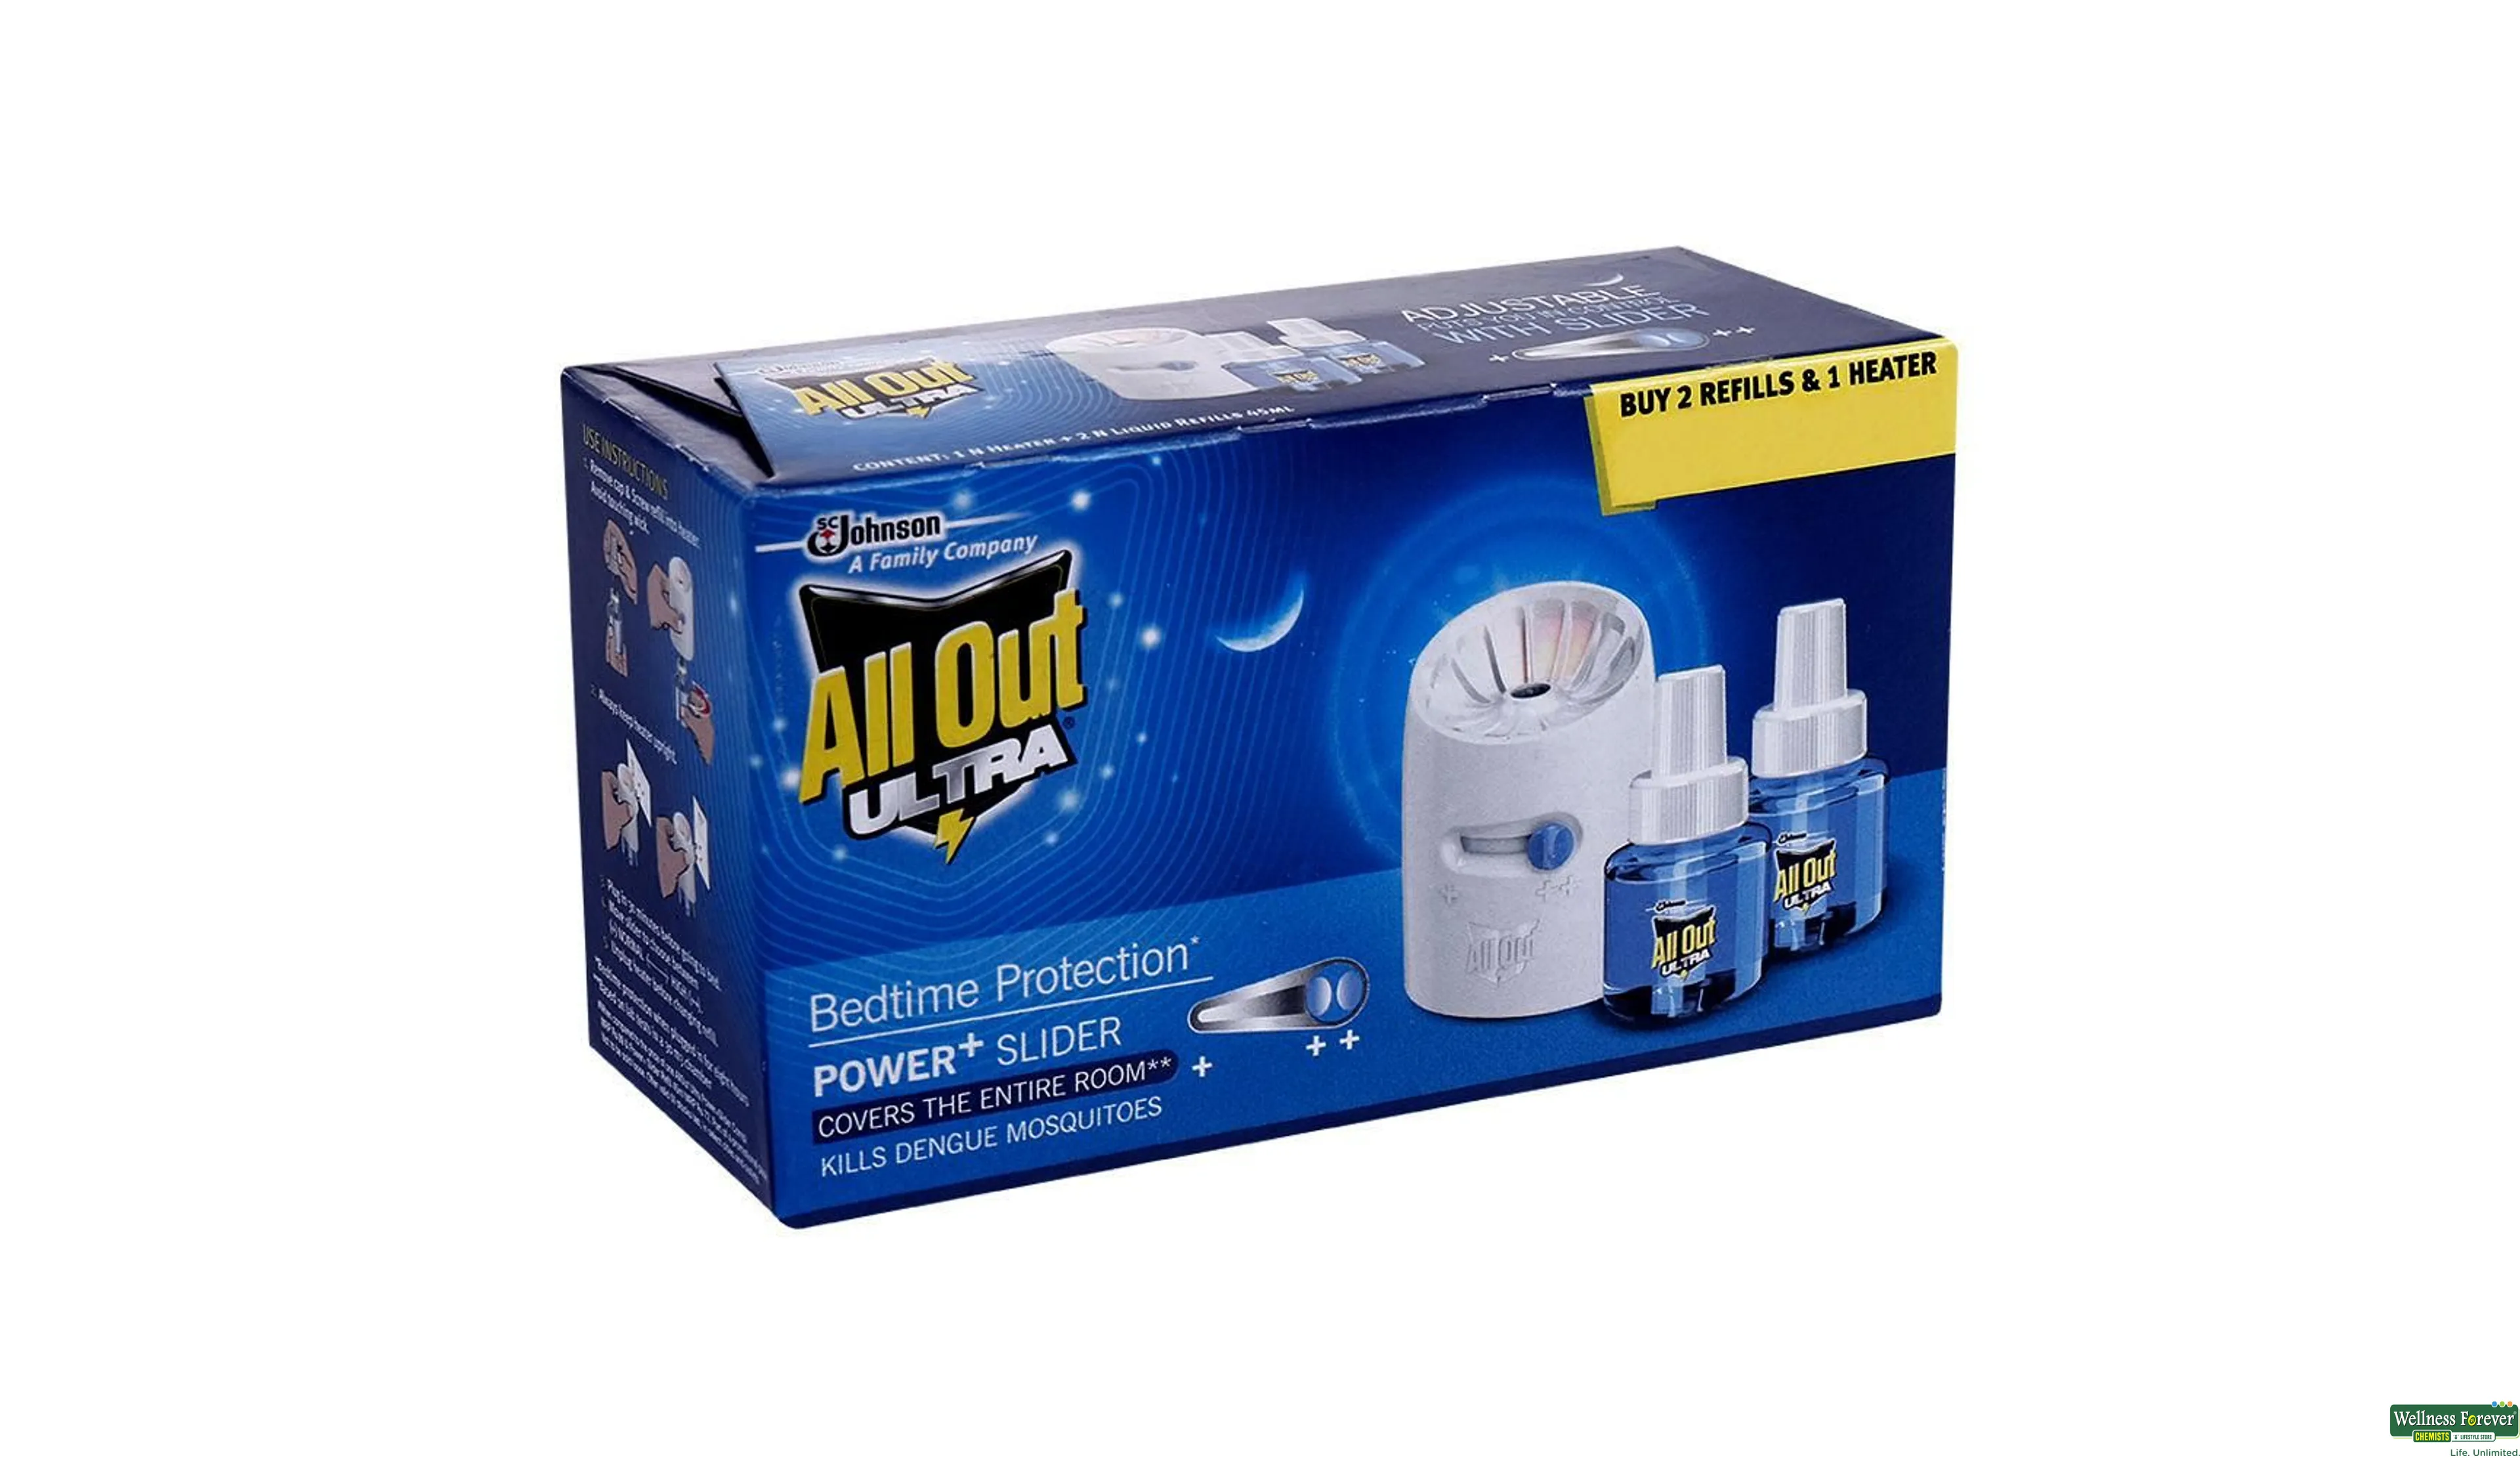 ALLOUT MOSQUITO ULTRA POWER KIT+2REF 45ML- 1, 1KIT, 